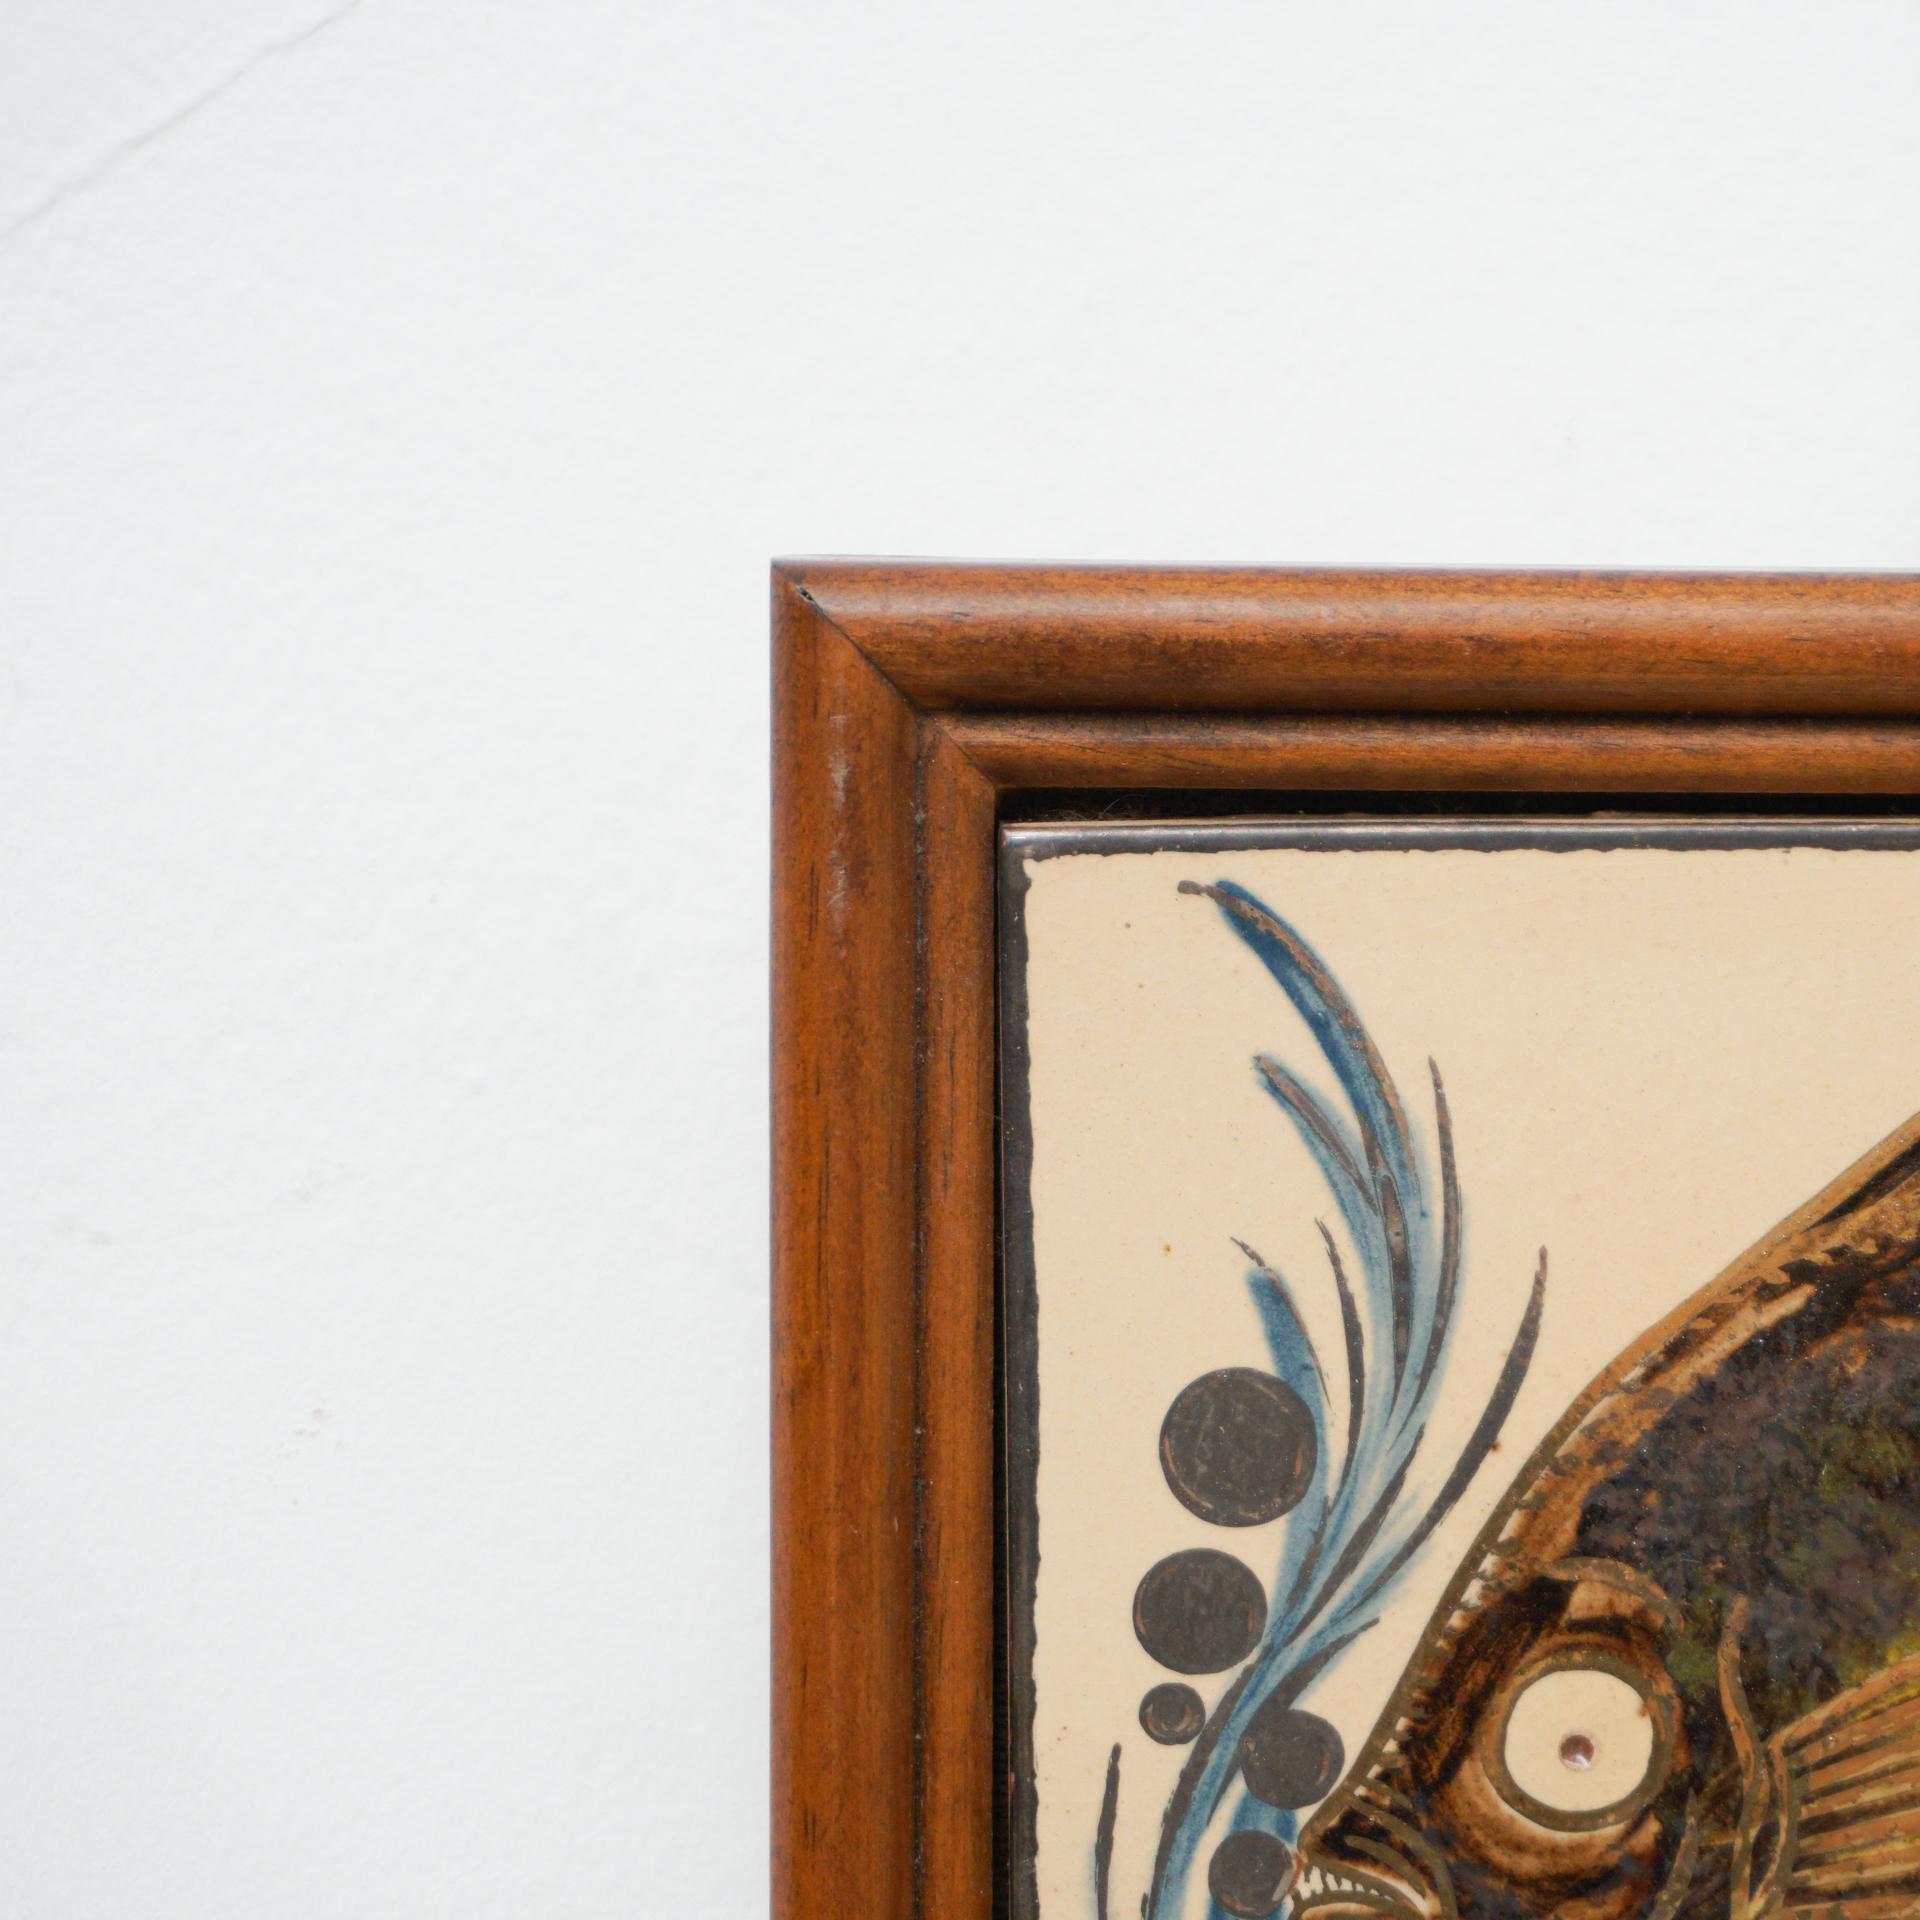 Ceramic hand painted Artwork of a fish by Catalan artist Diaz Costa, circa 1960.
Framed.

In original condition, with minor wear consistent of age and use, preserving a beautiul patina.